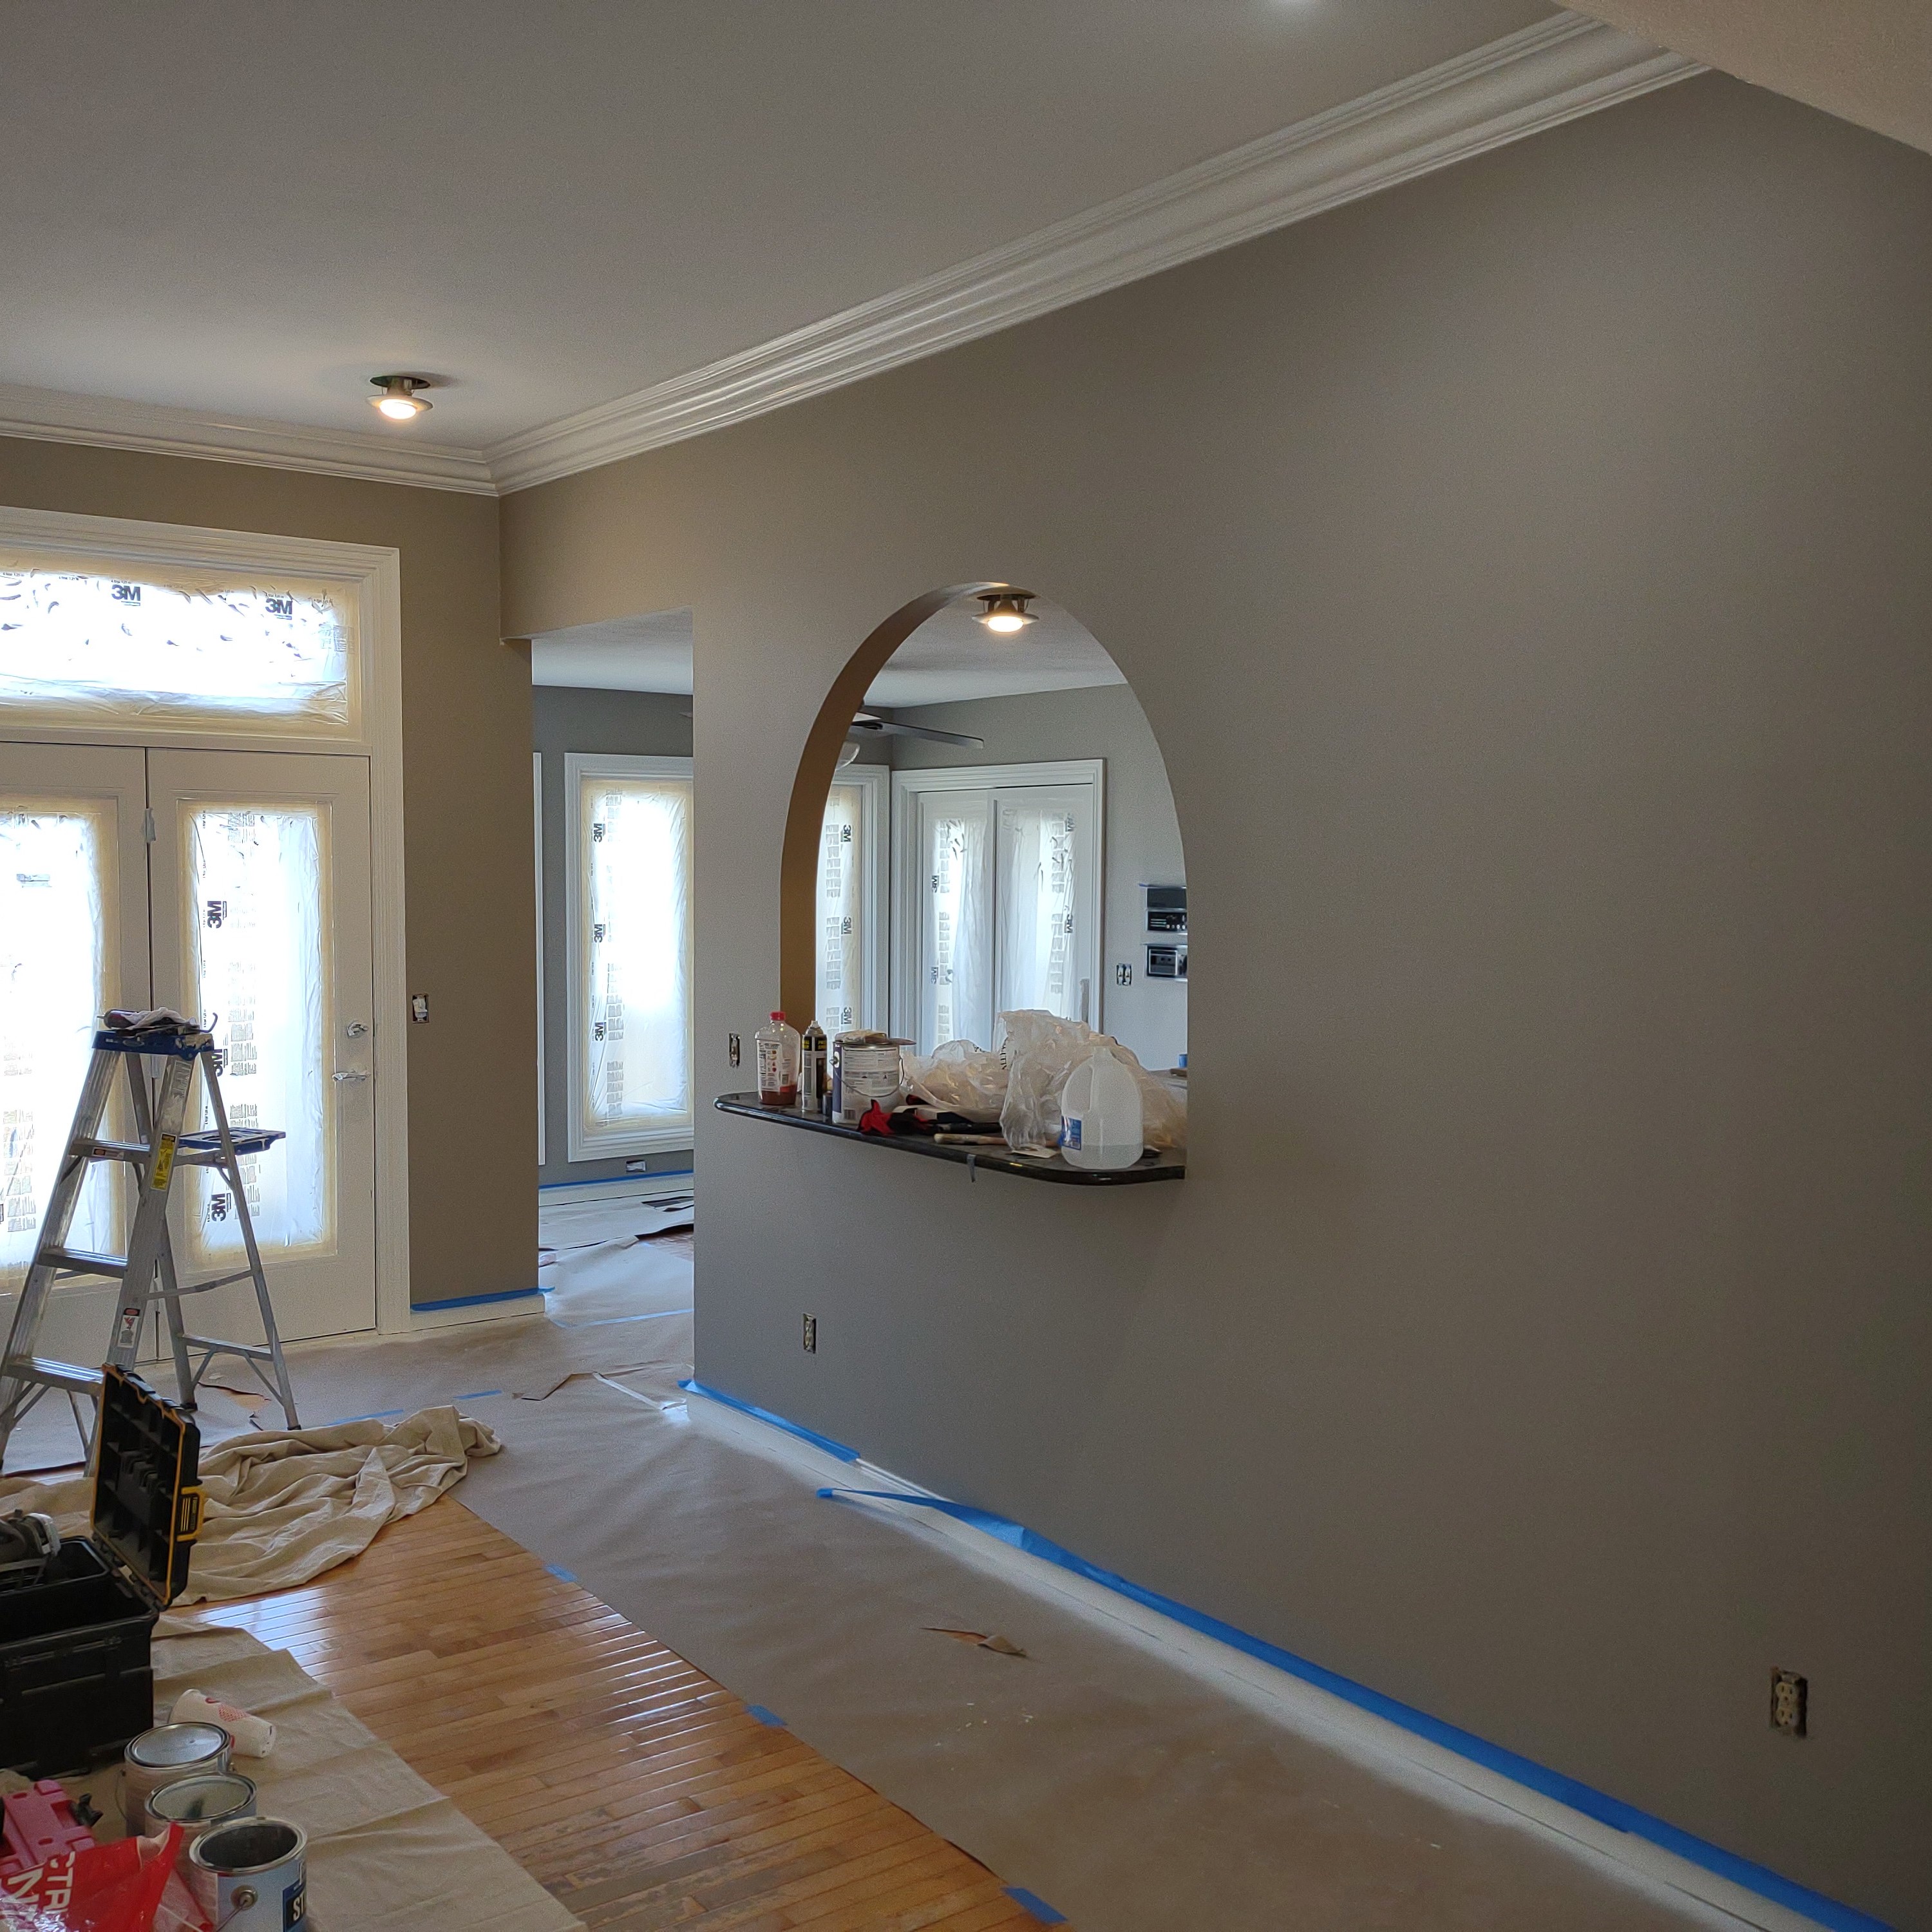 Beautiful Home Walls With Fresh Coat Of Paint.